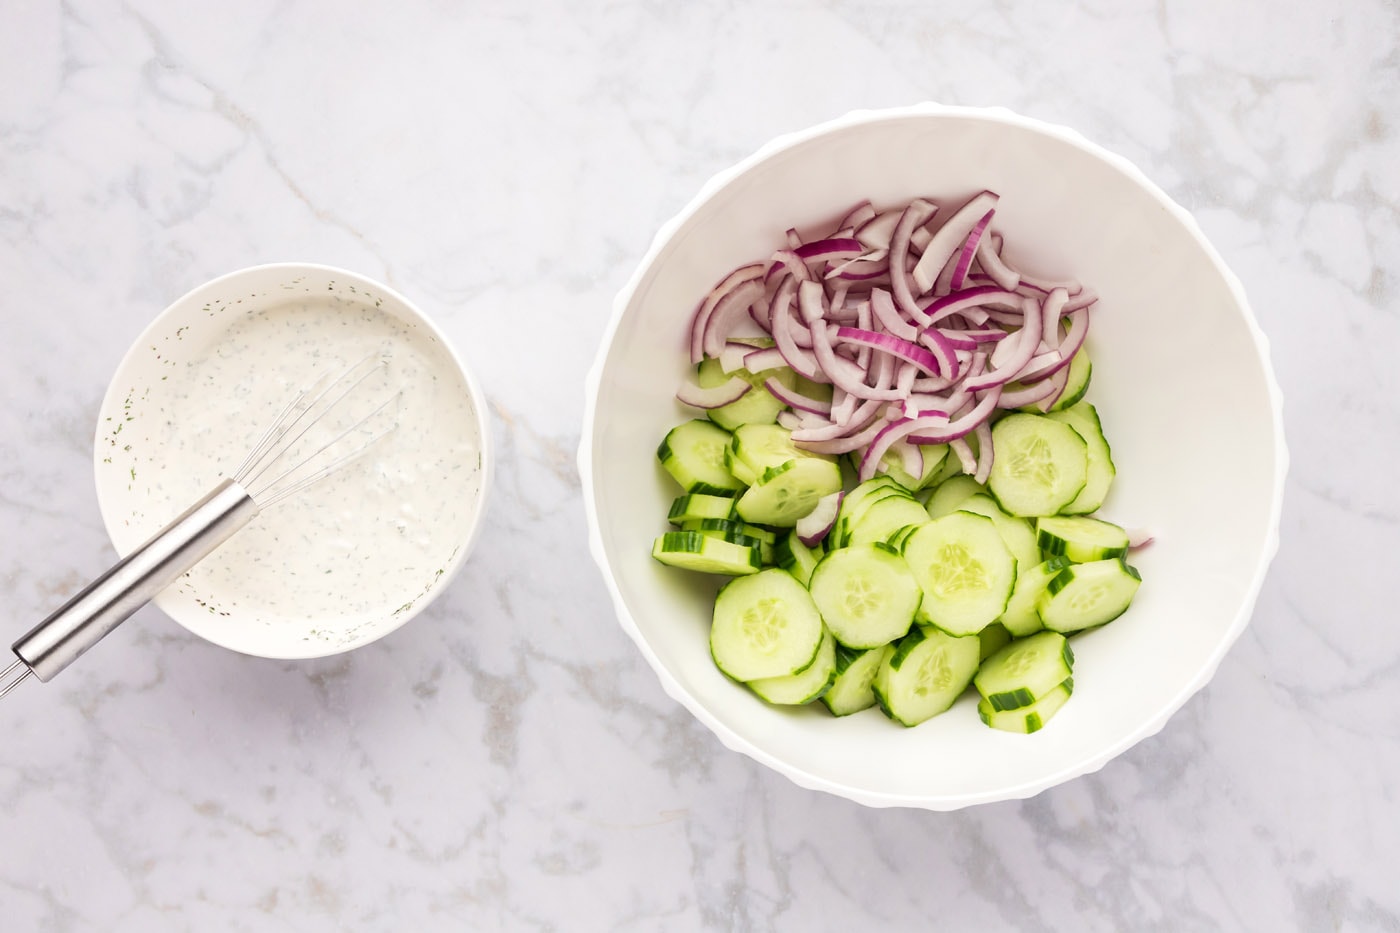 red onion and cucumber in a mixing bowl along with creamy dressing on the side